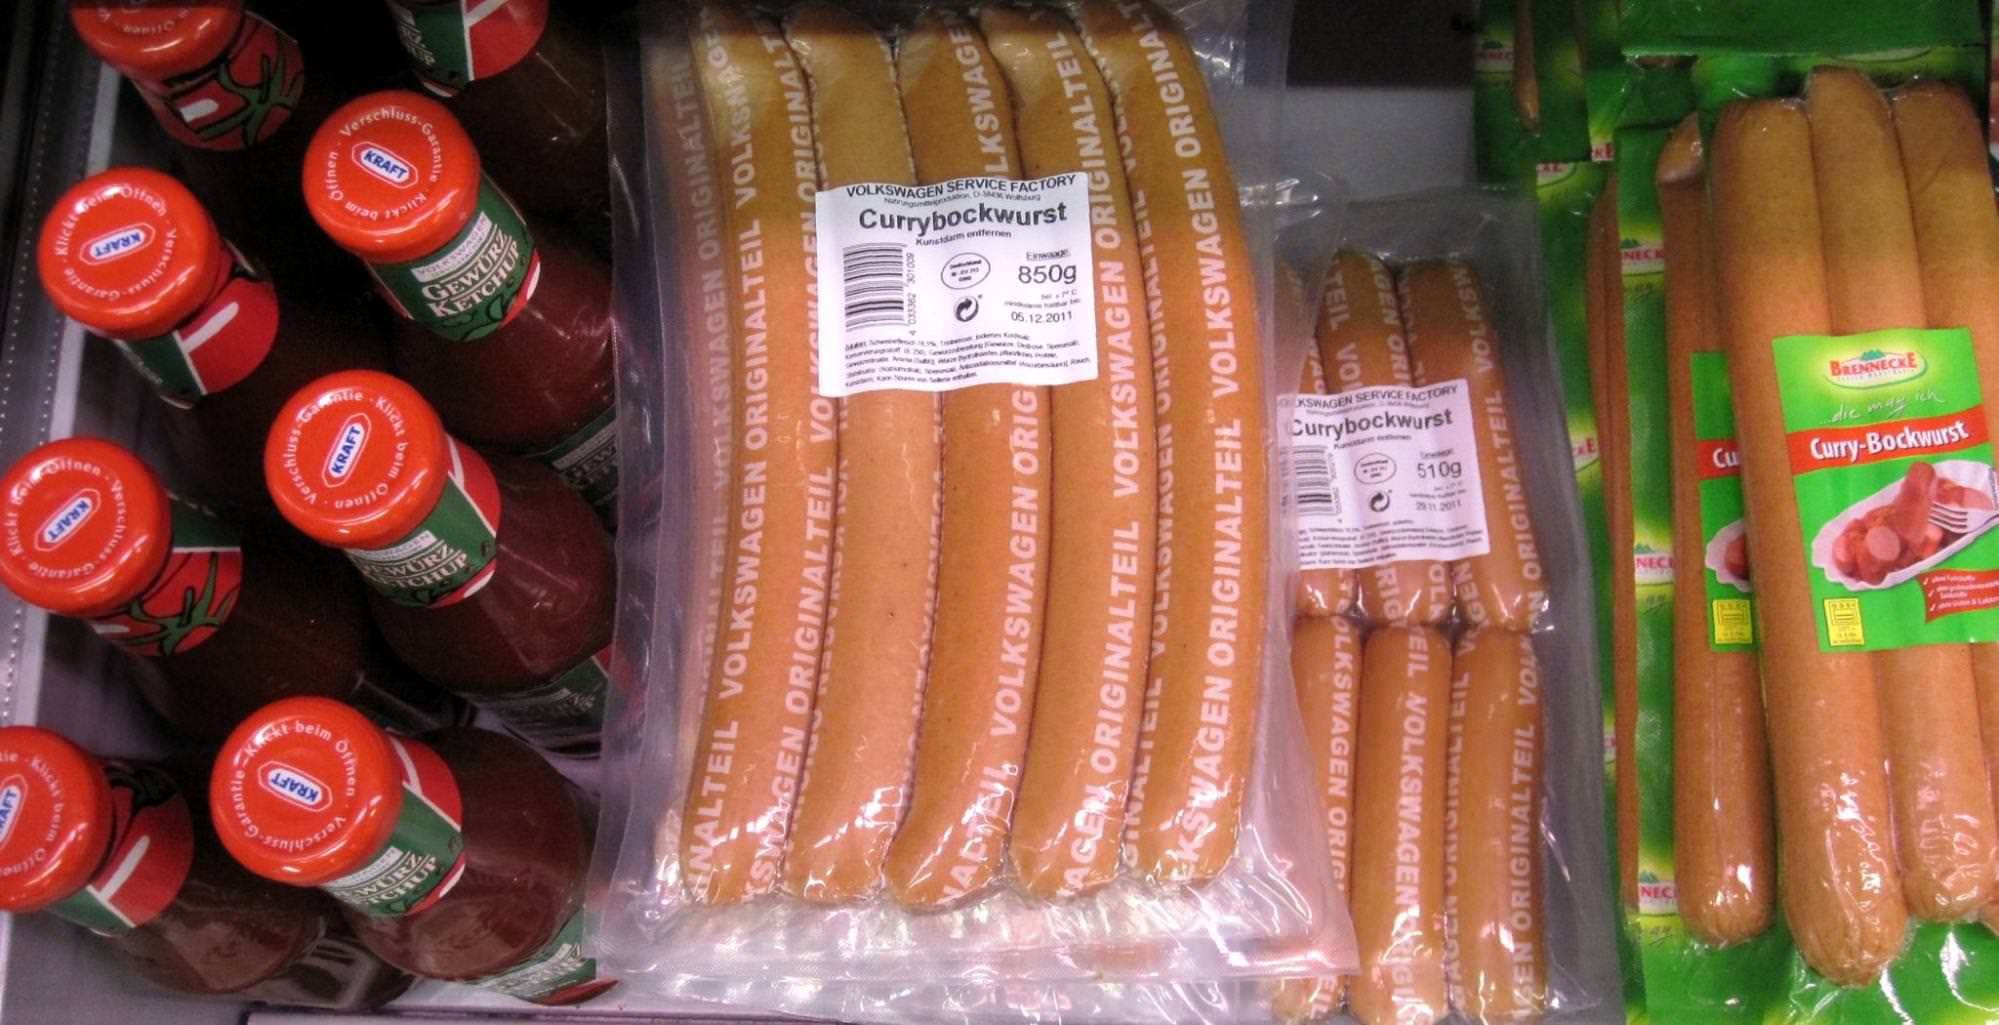 Picture of Volkswagen currywurst in grocery store’s fridge.